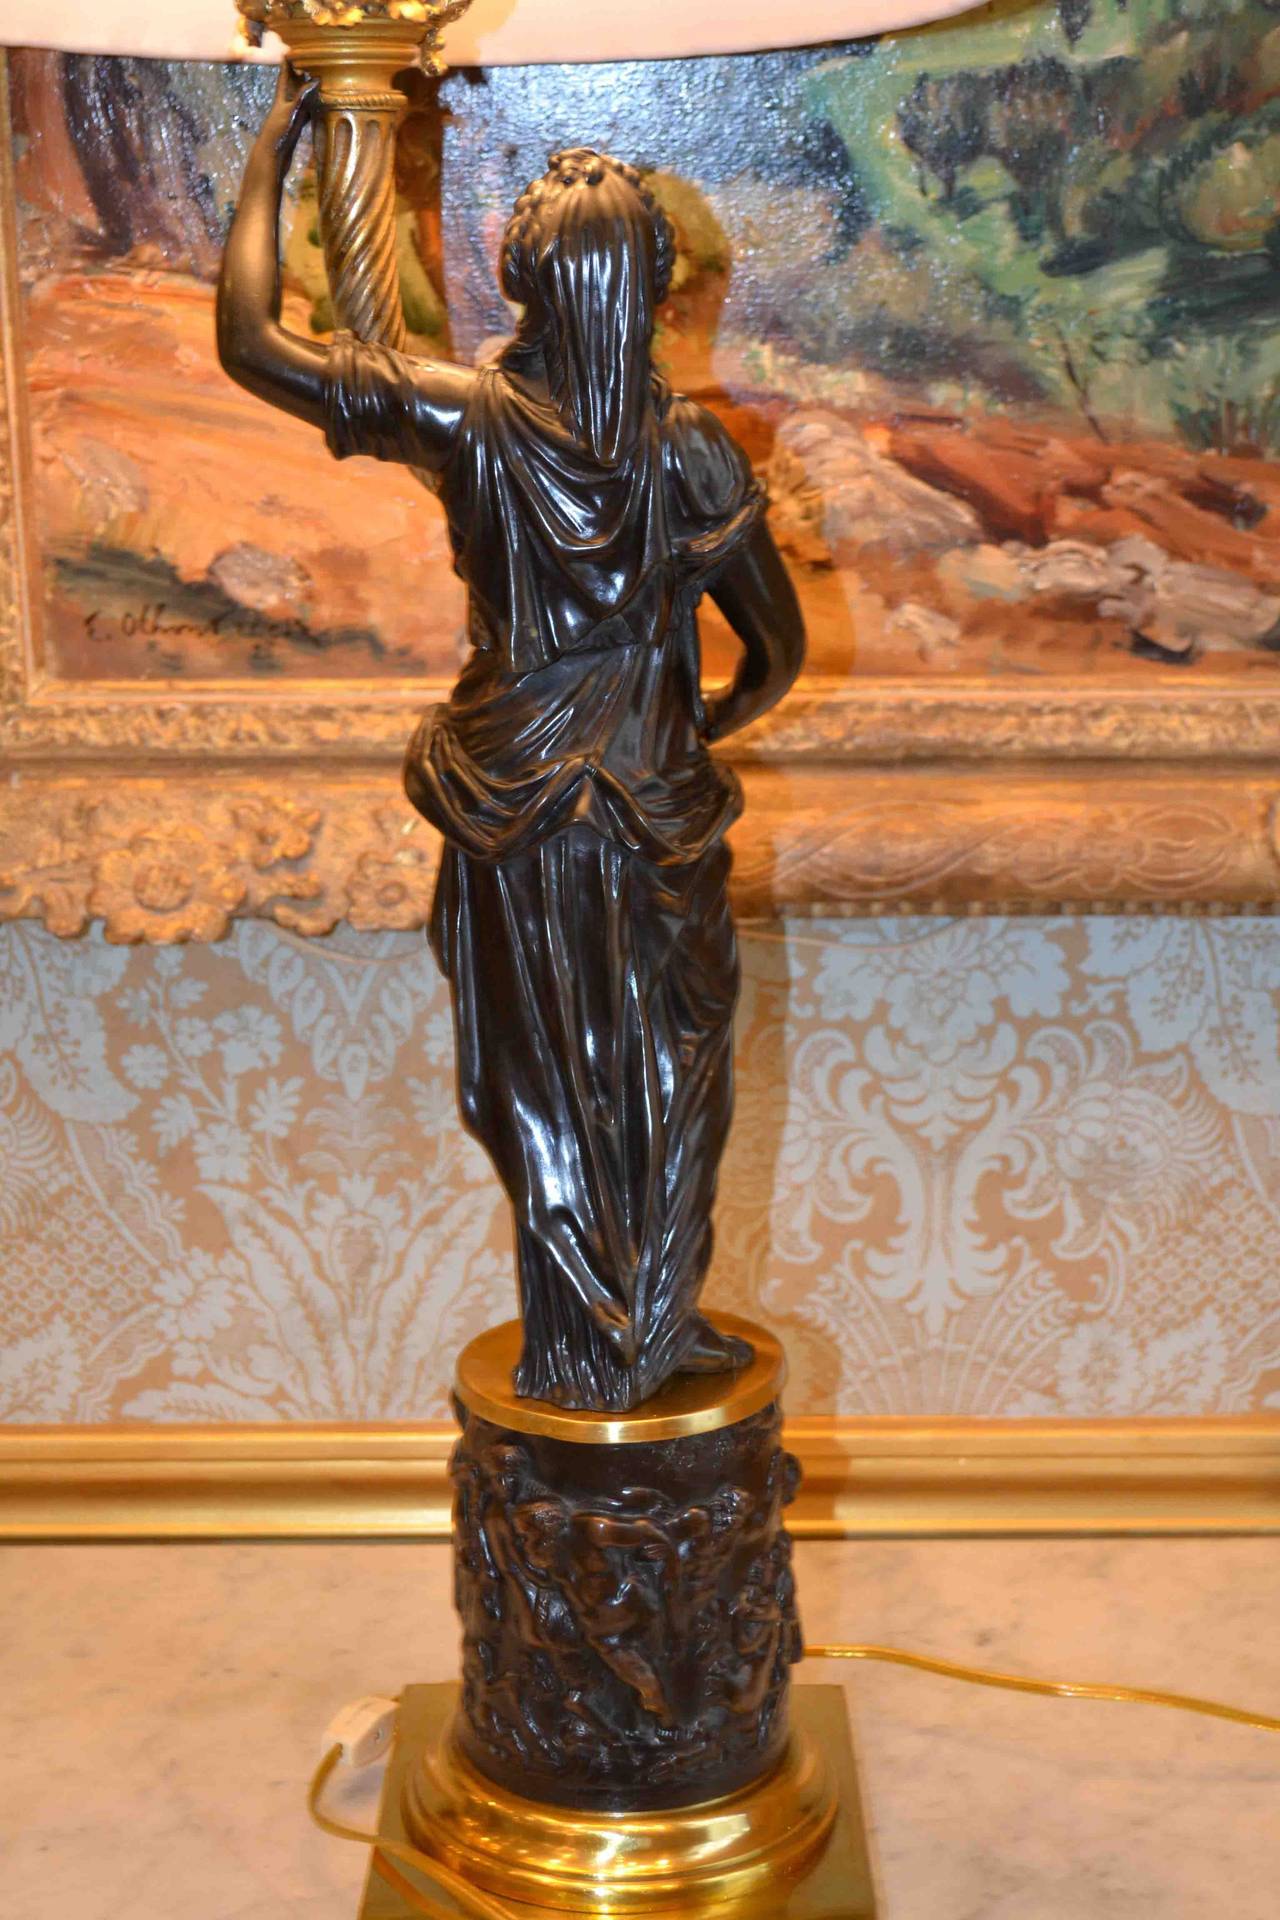 A standing classically draped female figure in finely chased patinated bronze, after a model by the French 18thC sculptor Clodion; she holds aloft a gilded cornucopia, (from which the statue has been wired); she stands on a circular bronze drum